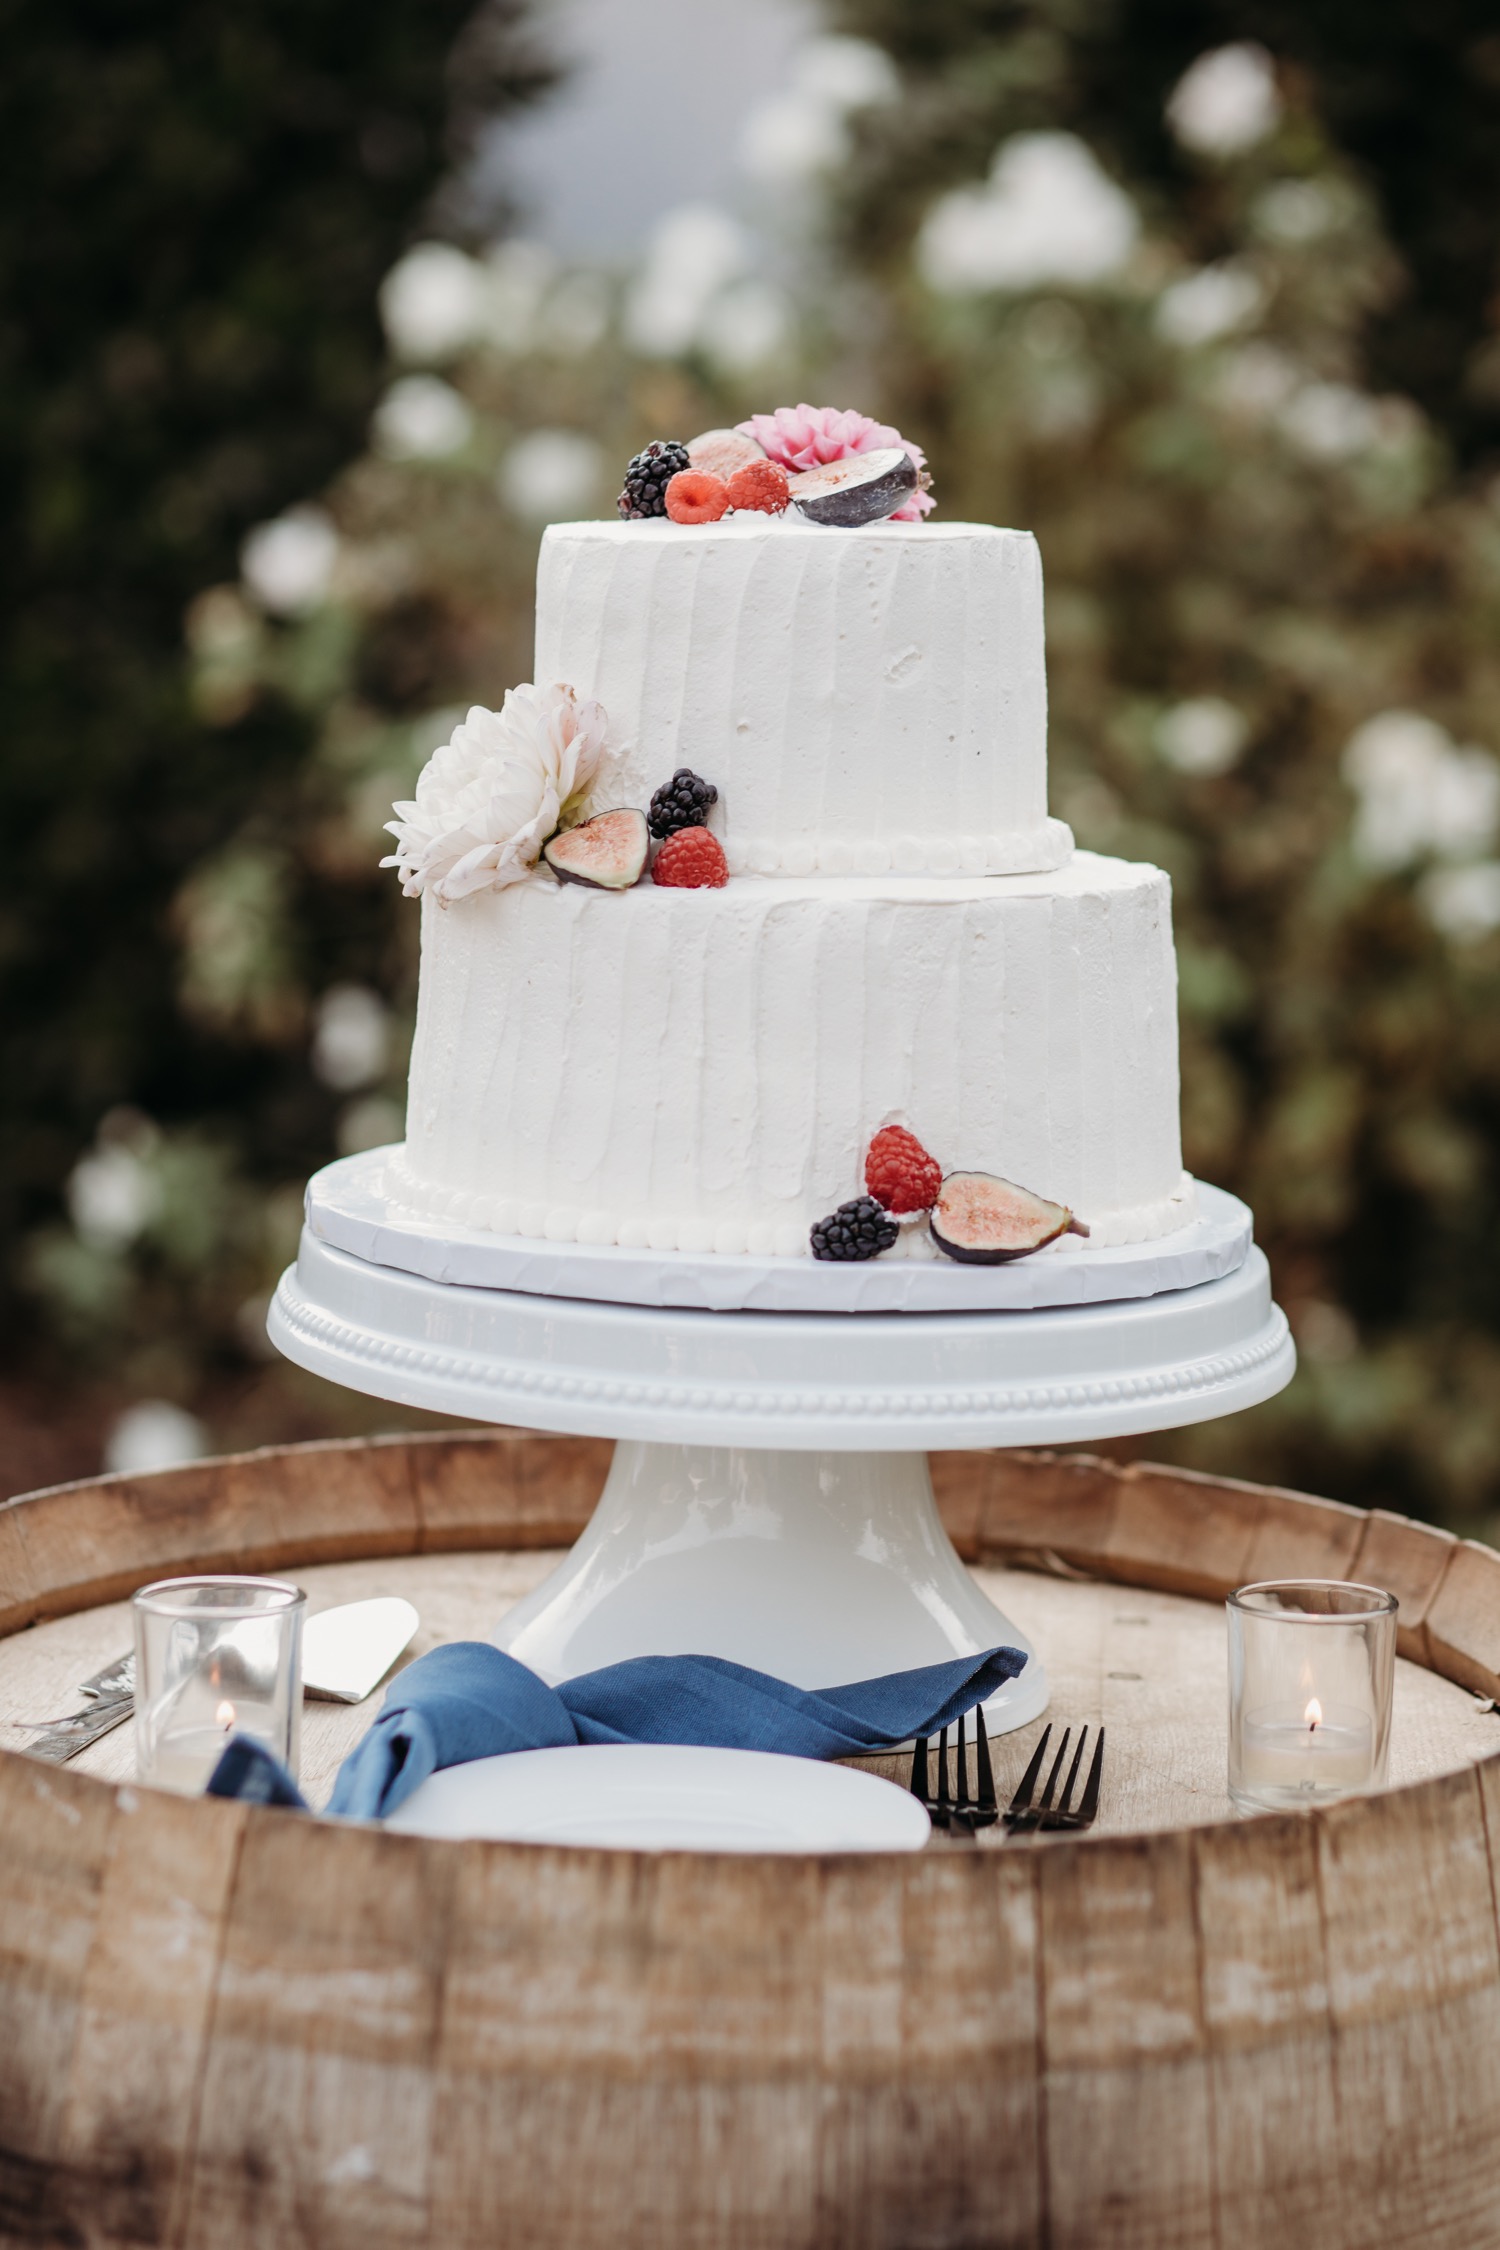 Gorgeous two tier white wedding cake on wine barrel for Alayna and Trey's wedding at The Maples in Woodland, CA